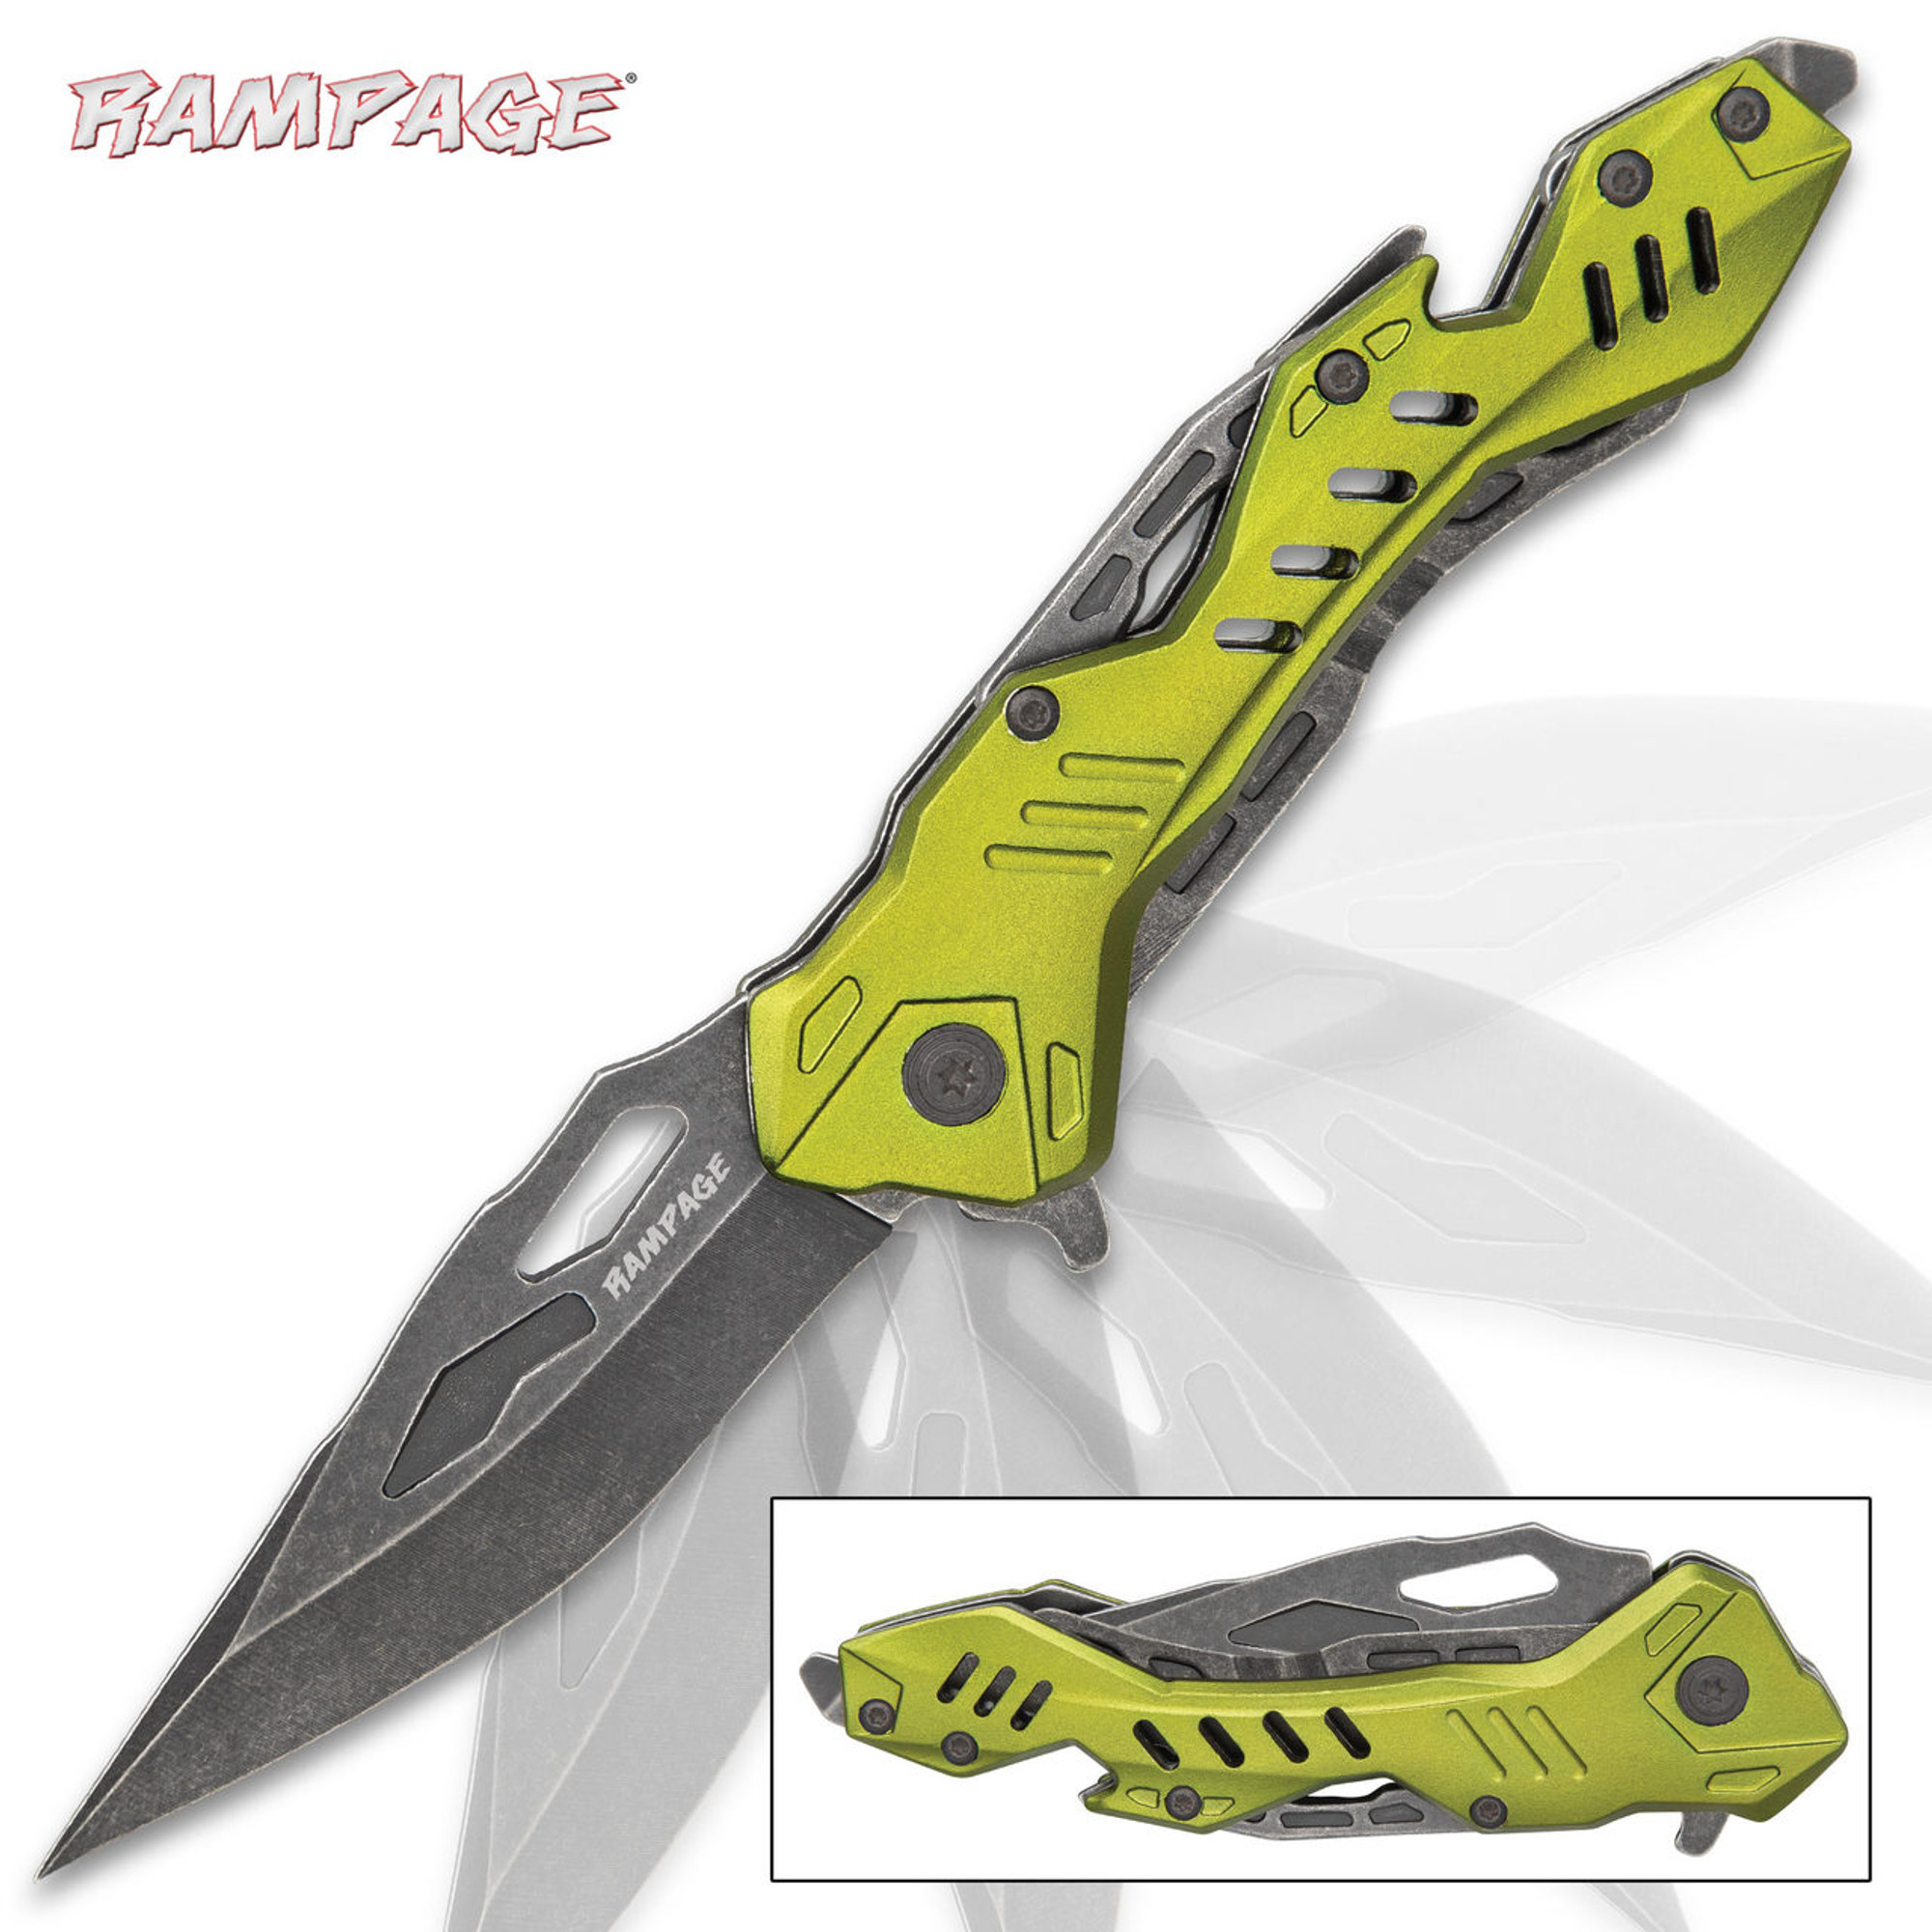 Rampage Atomica Assisted Opening Pocket Knife - Green